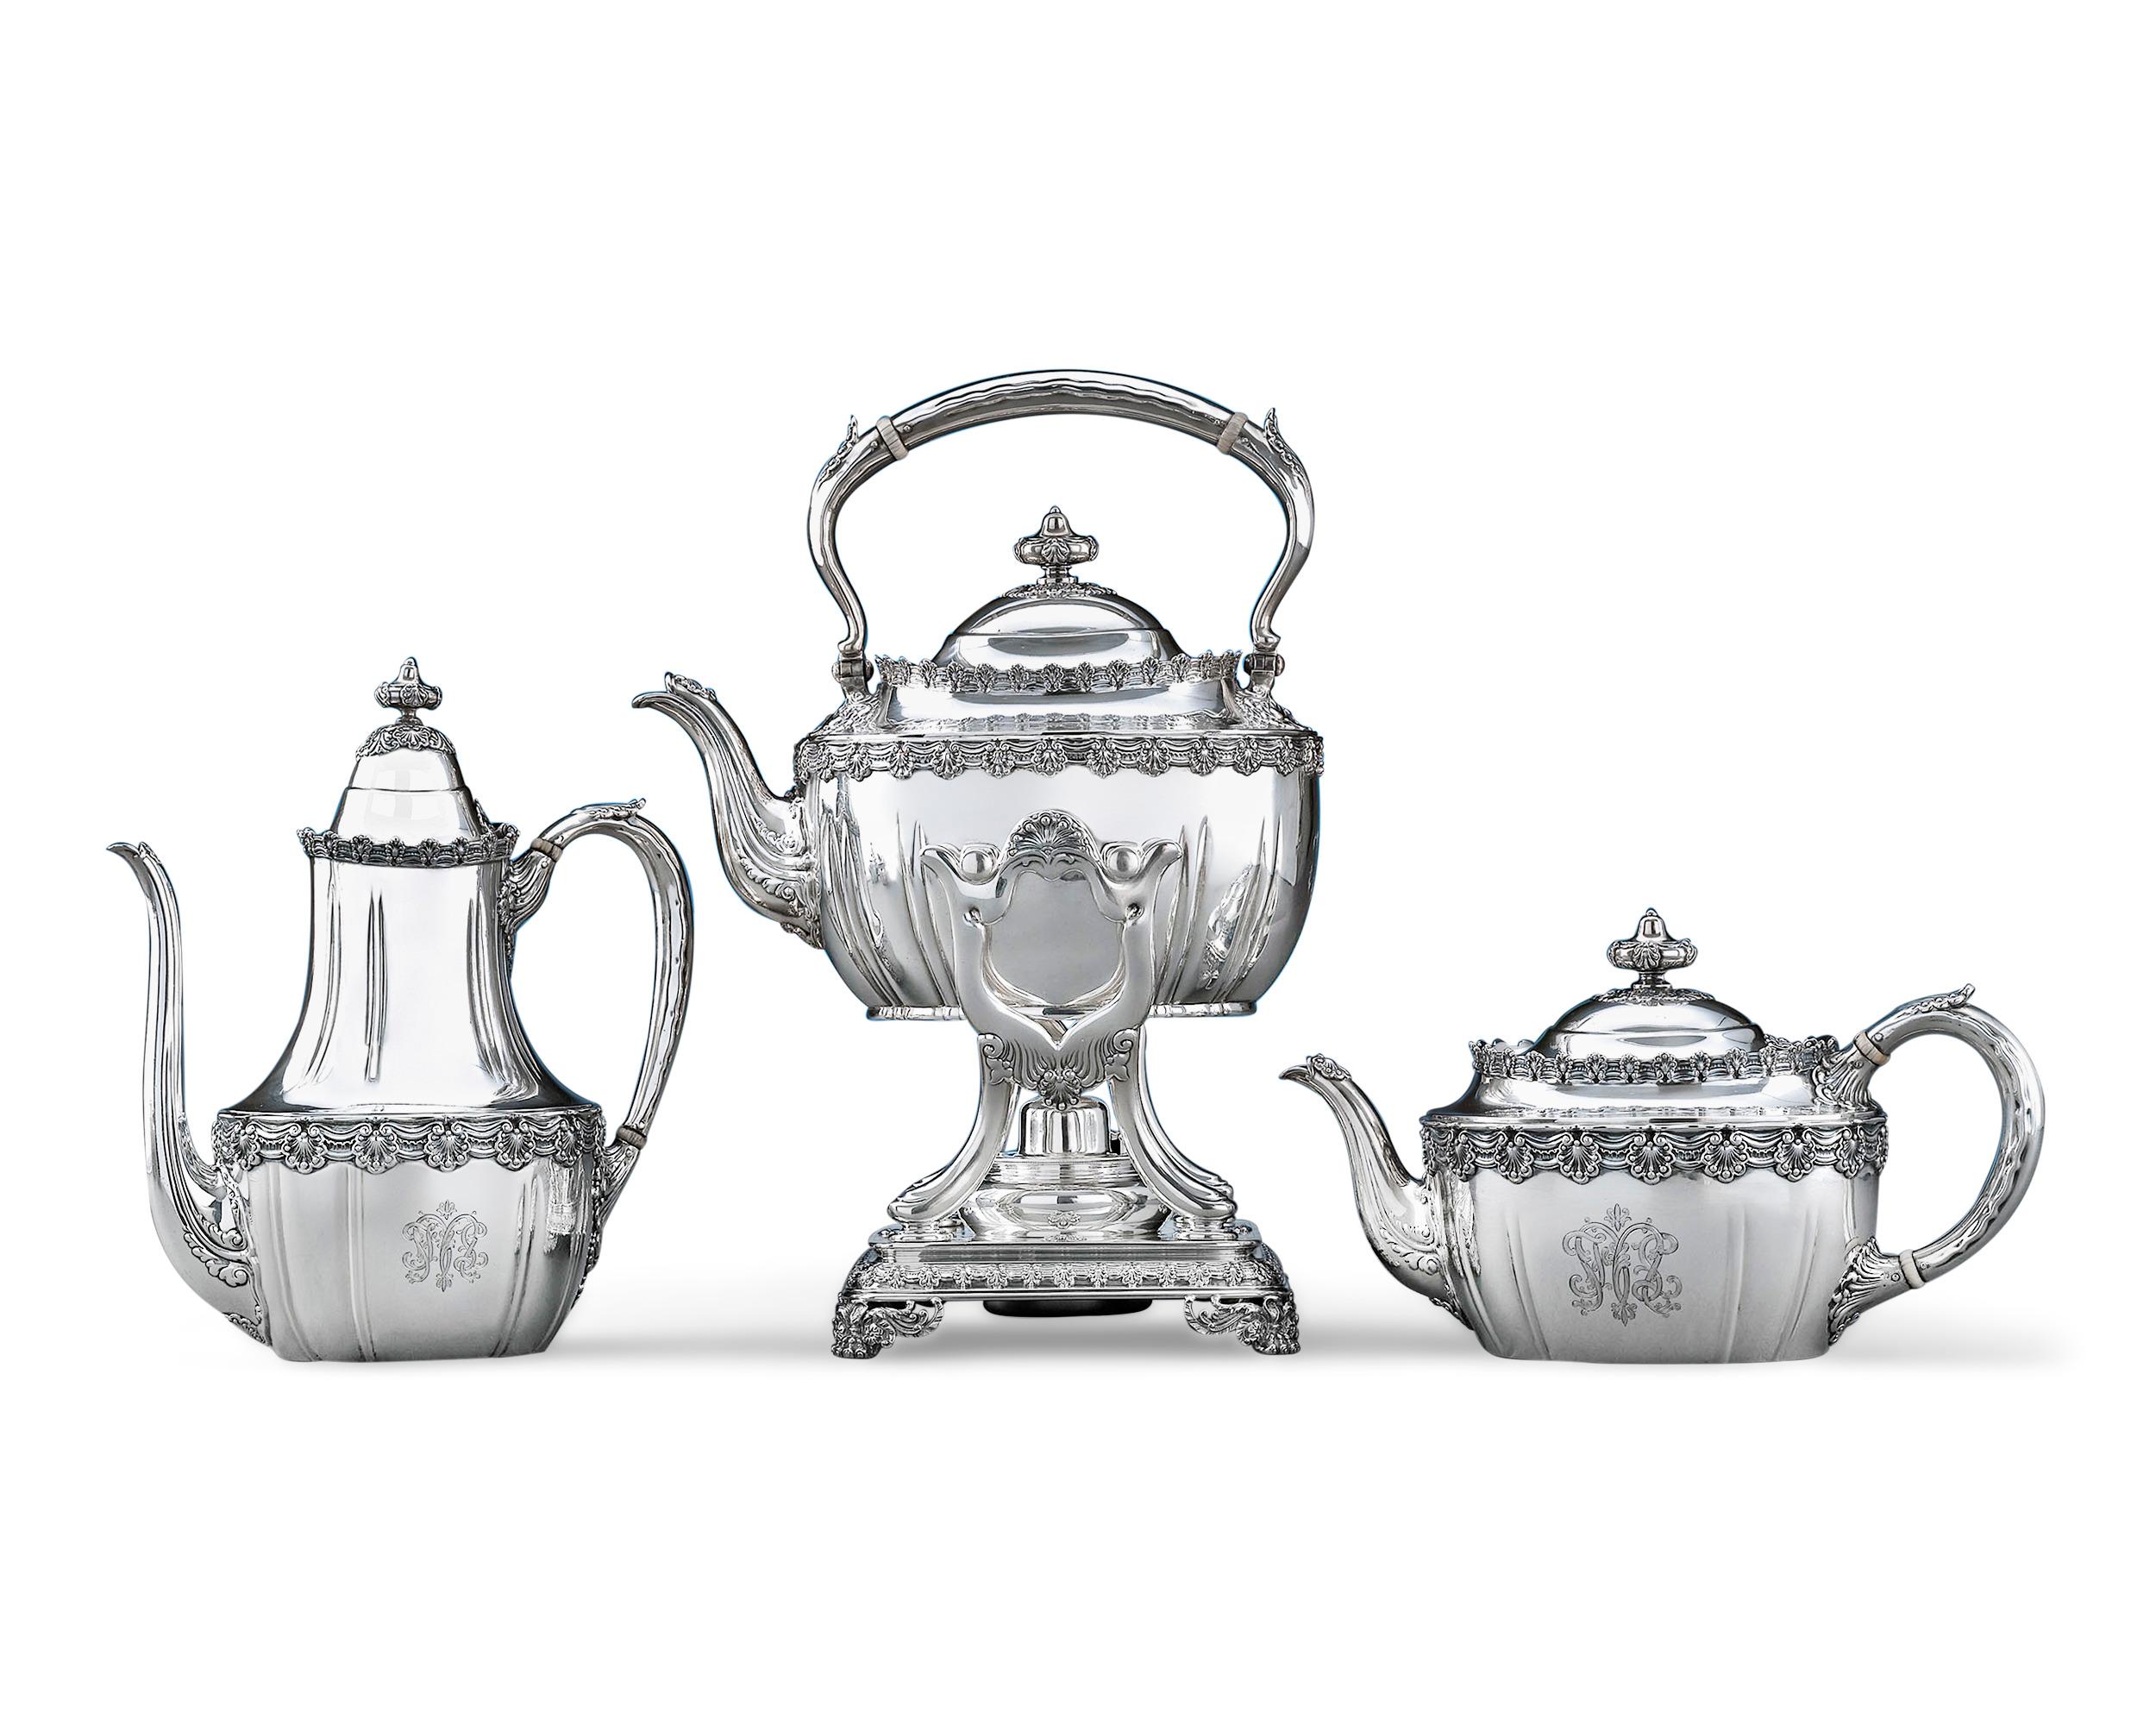 This important Tiffany & Co. sterling silver tea and coffee service is crafted in the classic English King pattern. Introduced by Tiffany in 1885, English King is fashioned to reflect the elaborate entertaining styles of the Gilded Age, and is